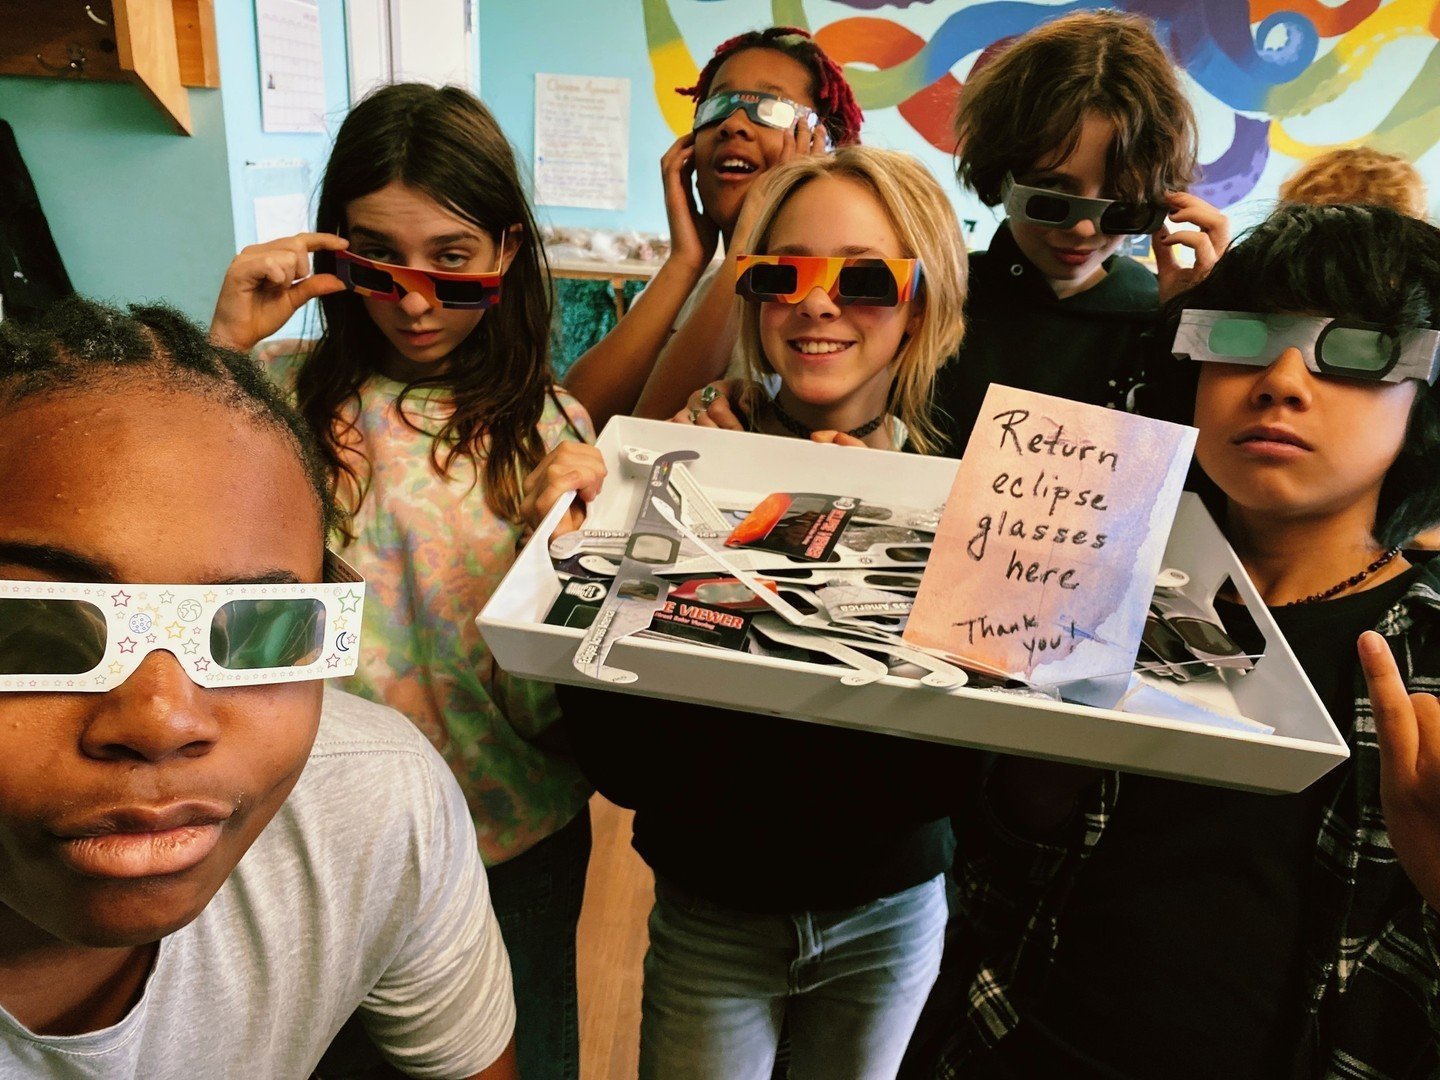 Associates of the CAASE Co. (Cool Awesome Amazing Solar Eclipse Co.) thank many community members for their donations of undamaged eclipse glasses and viewers. A 6th grade parent has connected us with a company sending these glasses to school childre